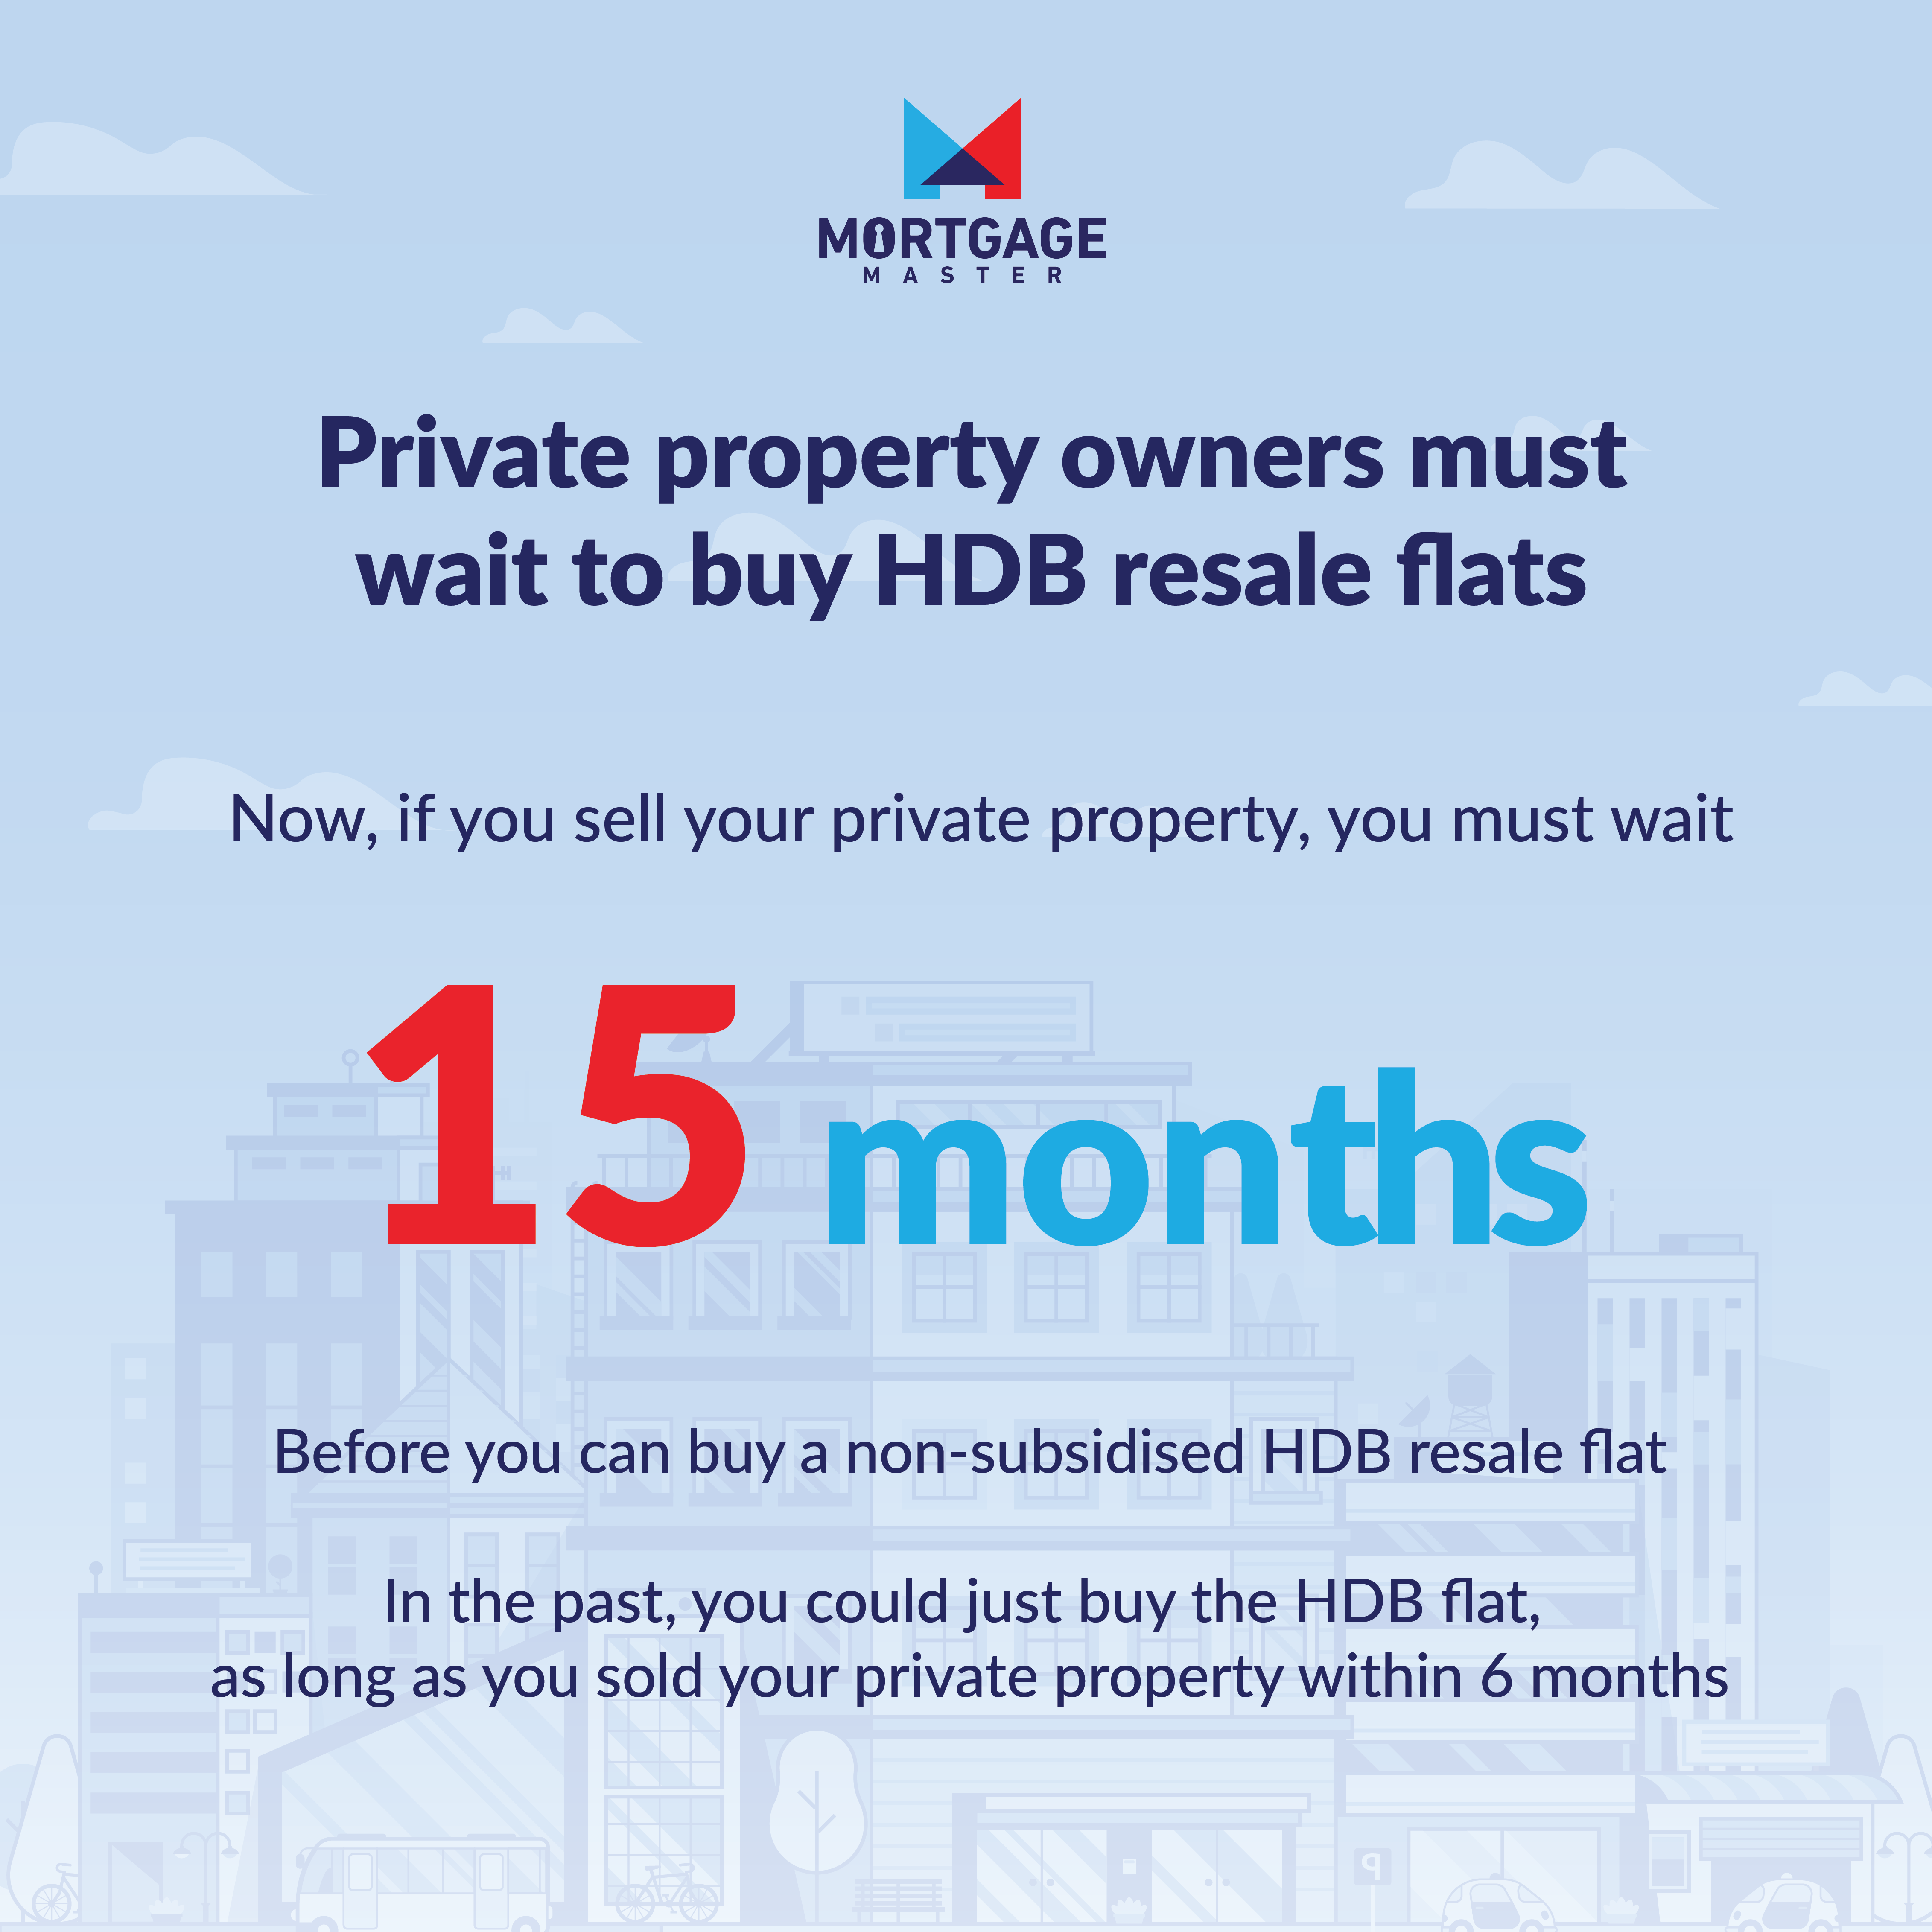 Private property owners must wait 15 months to buy HDB resale flats